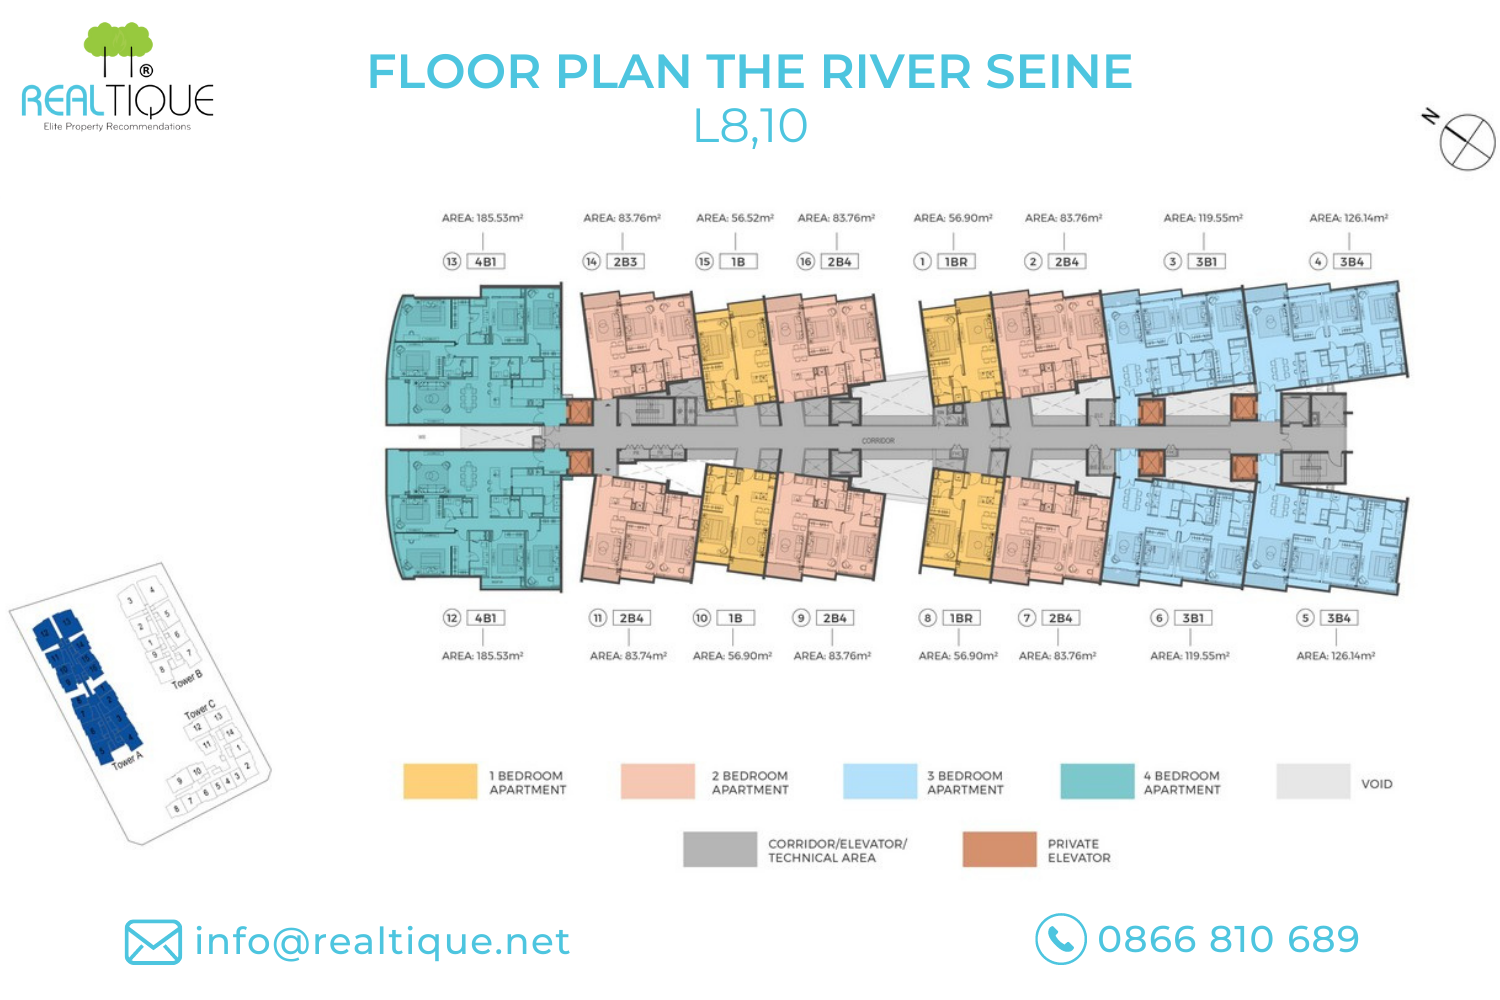 Typical floor plan of Tower River Seine, The River Thu Thiem